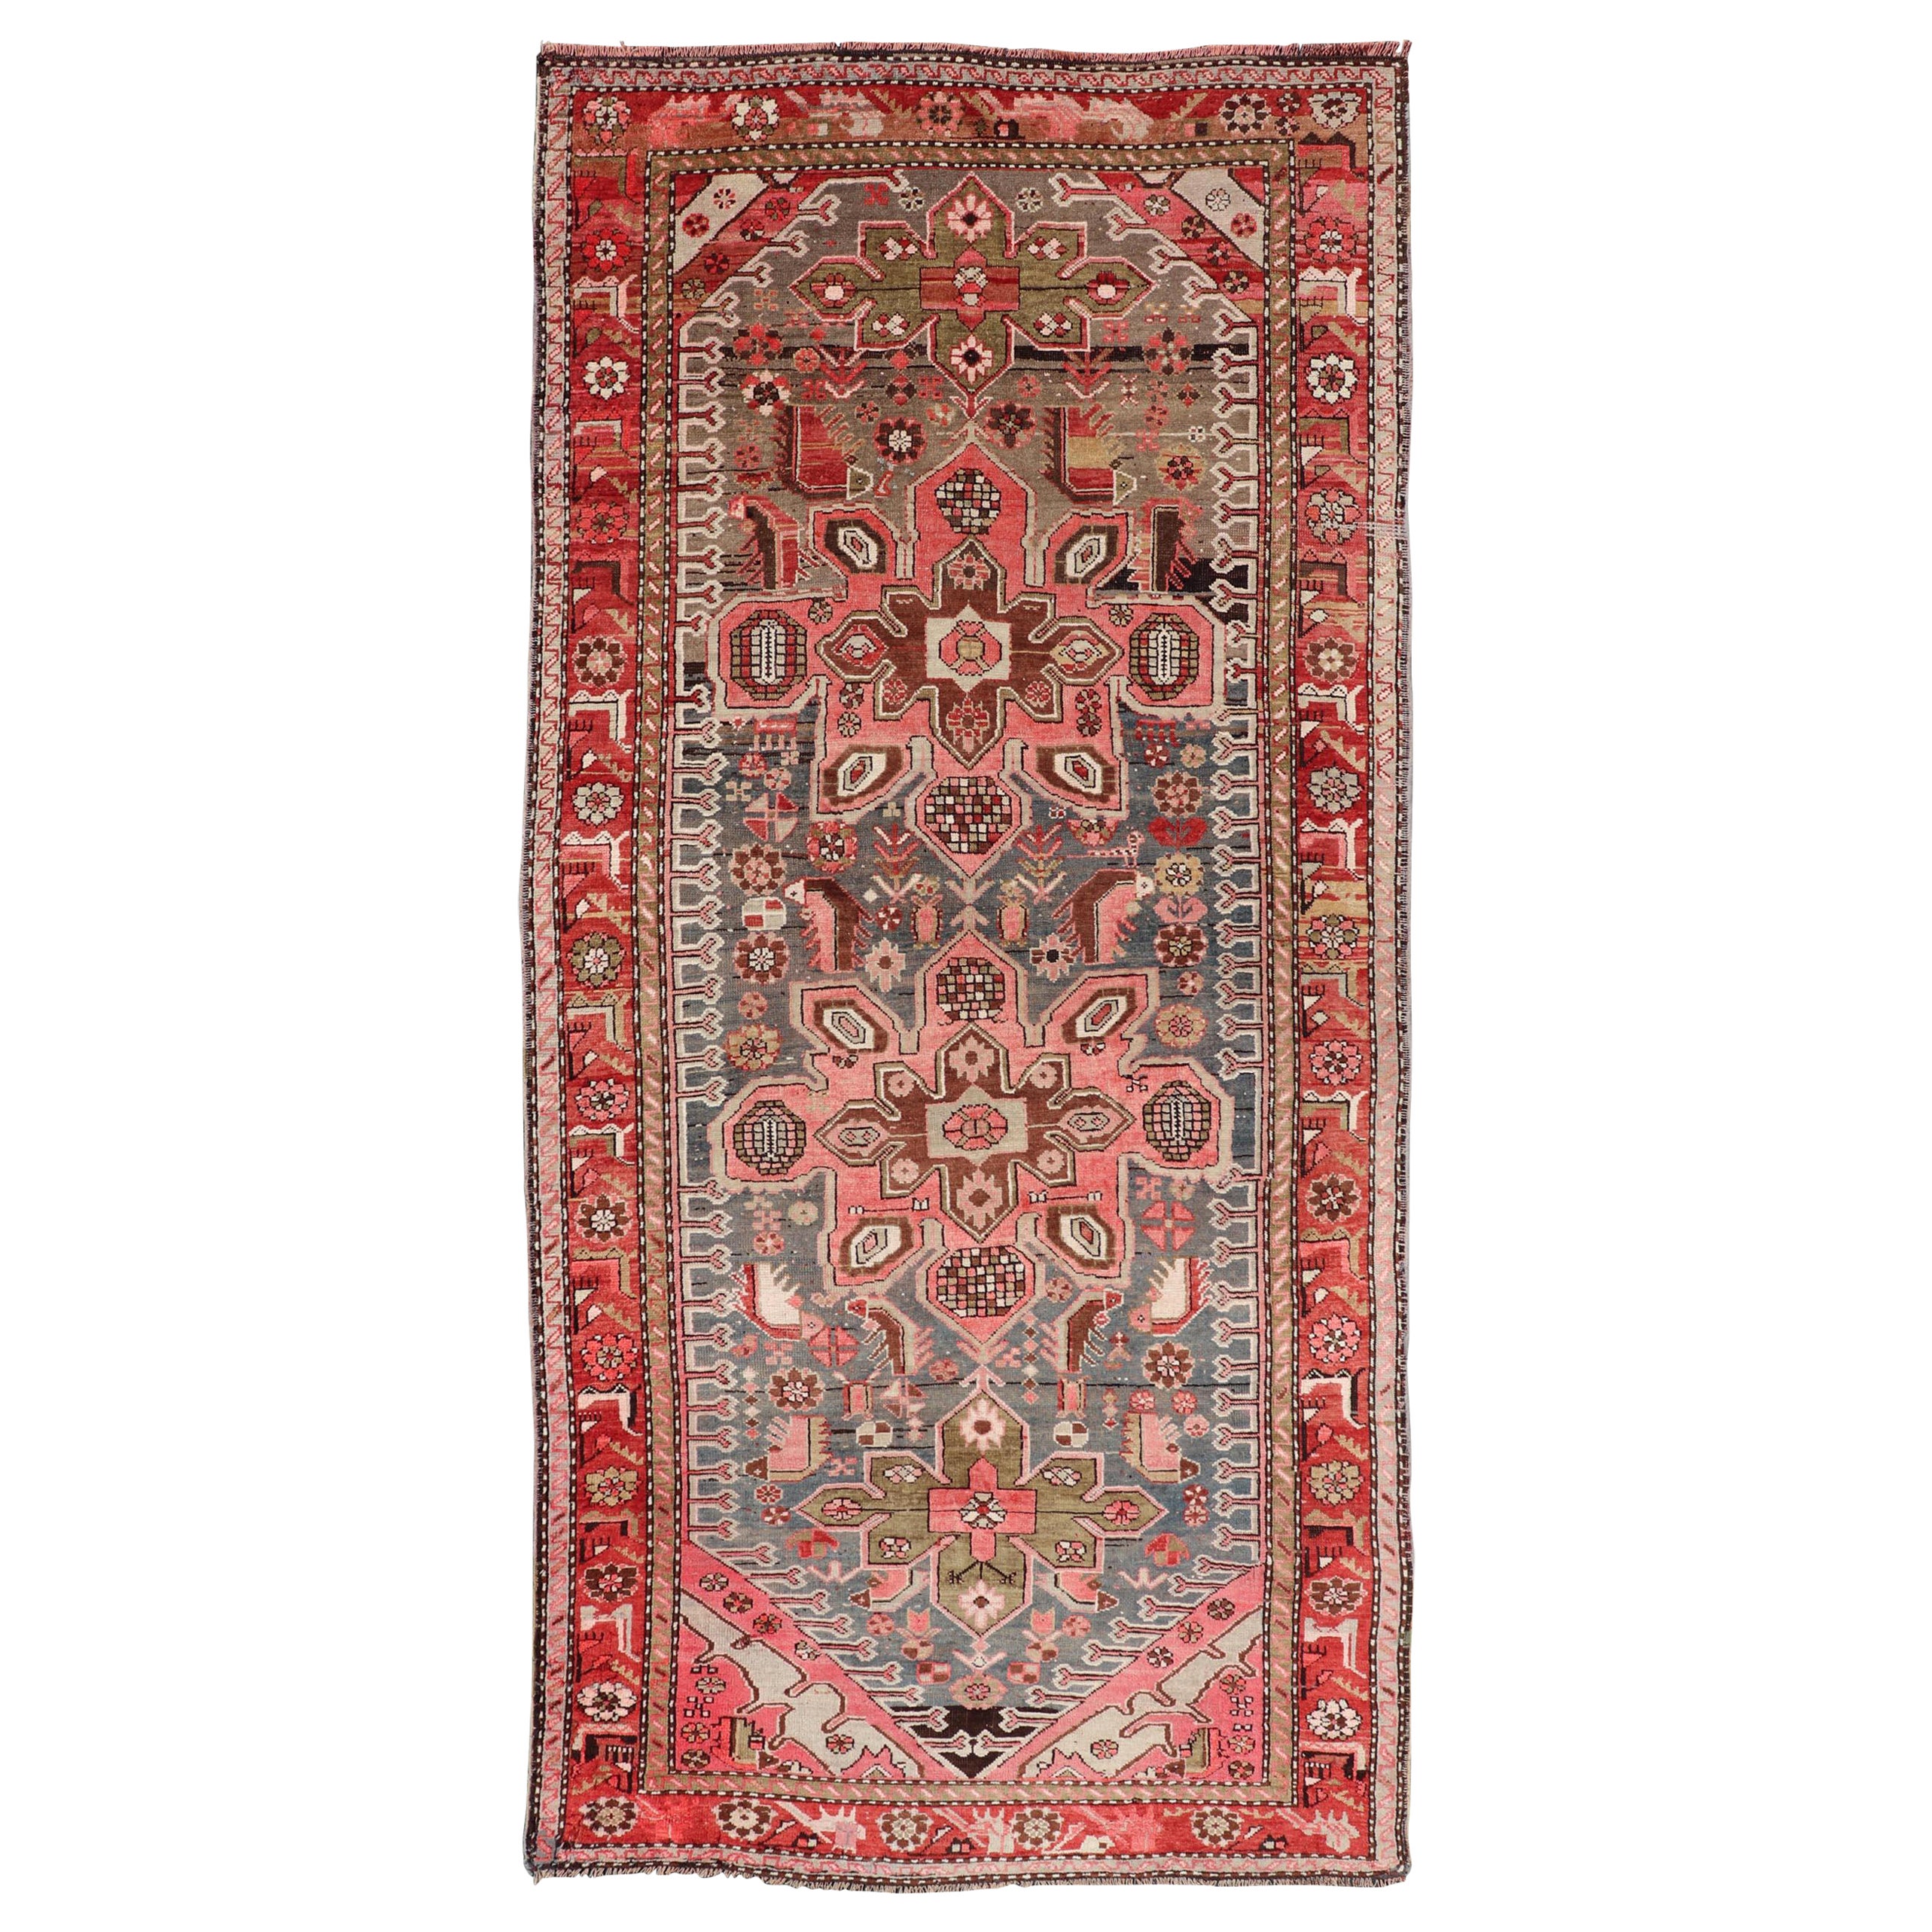 Antique Caucasian Karabagh Gallery Runner With Large Medallions Of Pink And Red For Sale